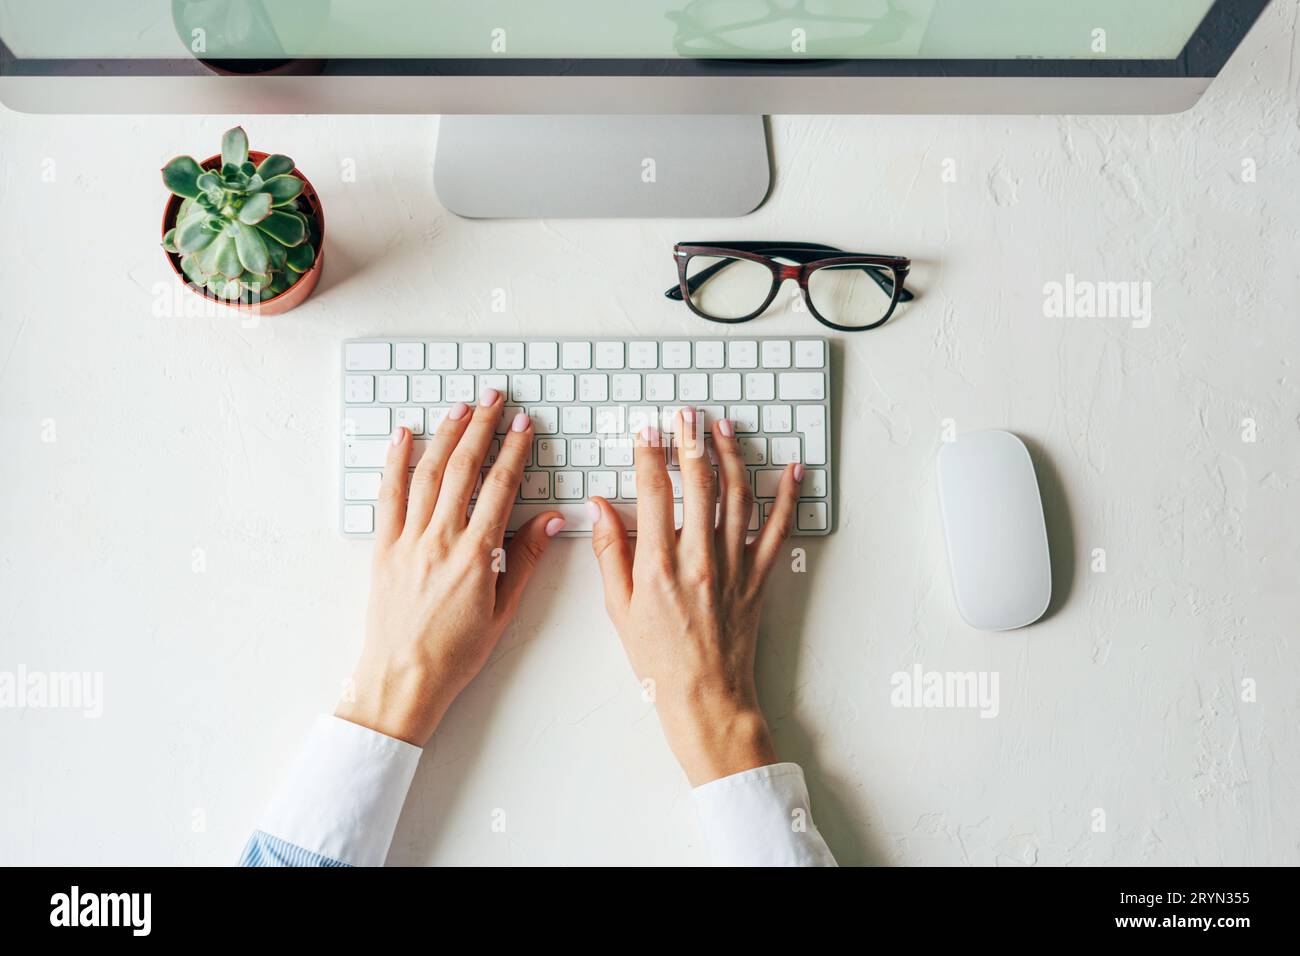 Hands keyboard office white background Stock Photo